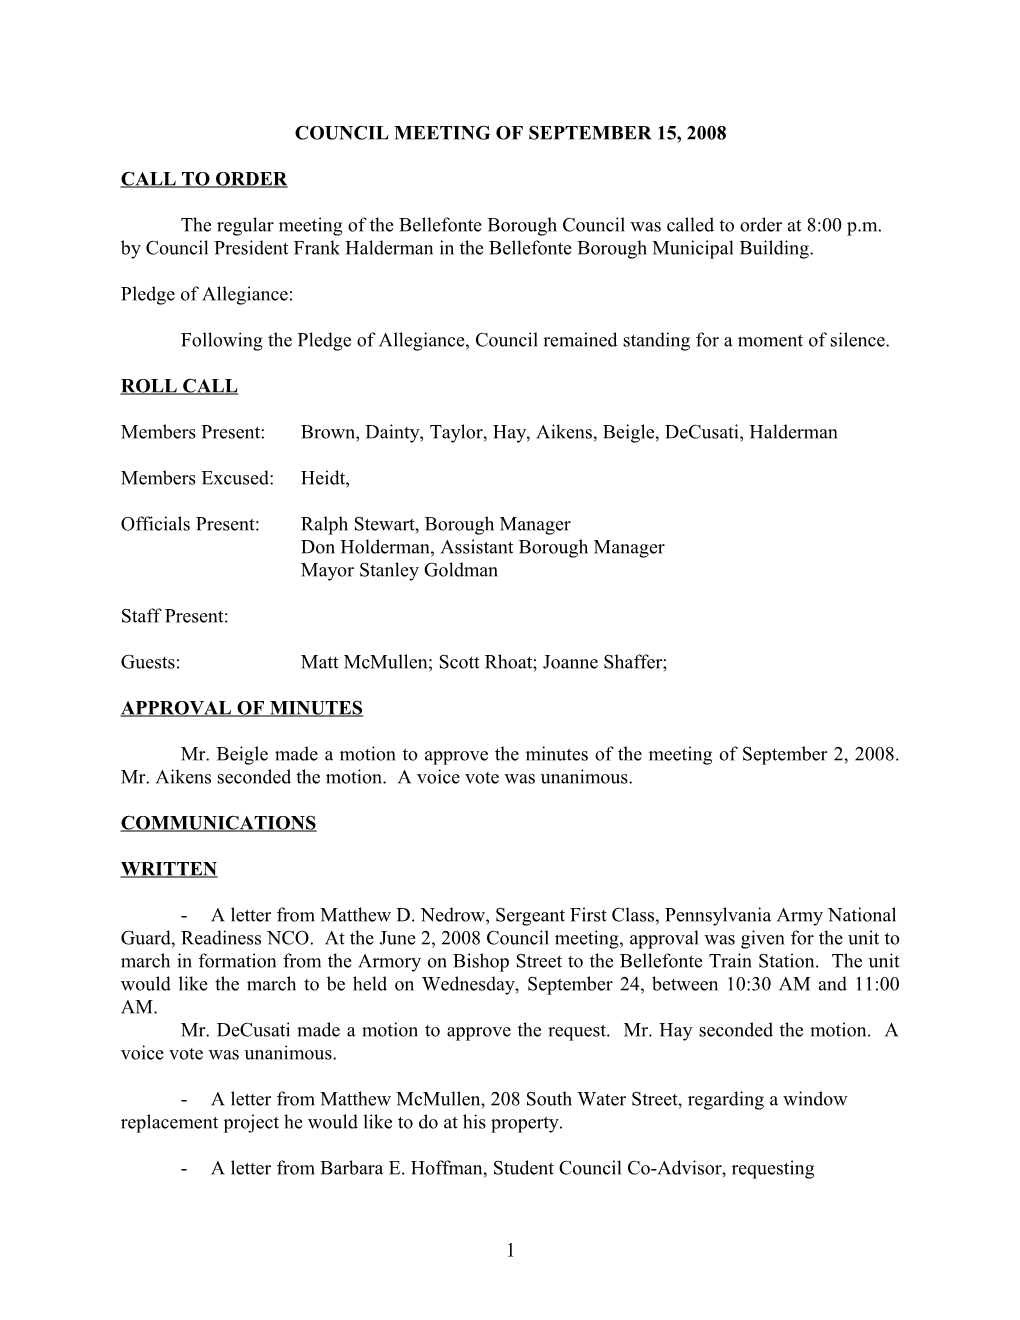 Council Meeting of October 6, 2003